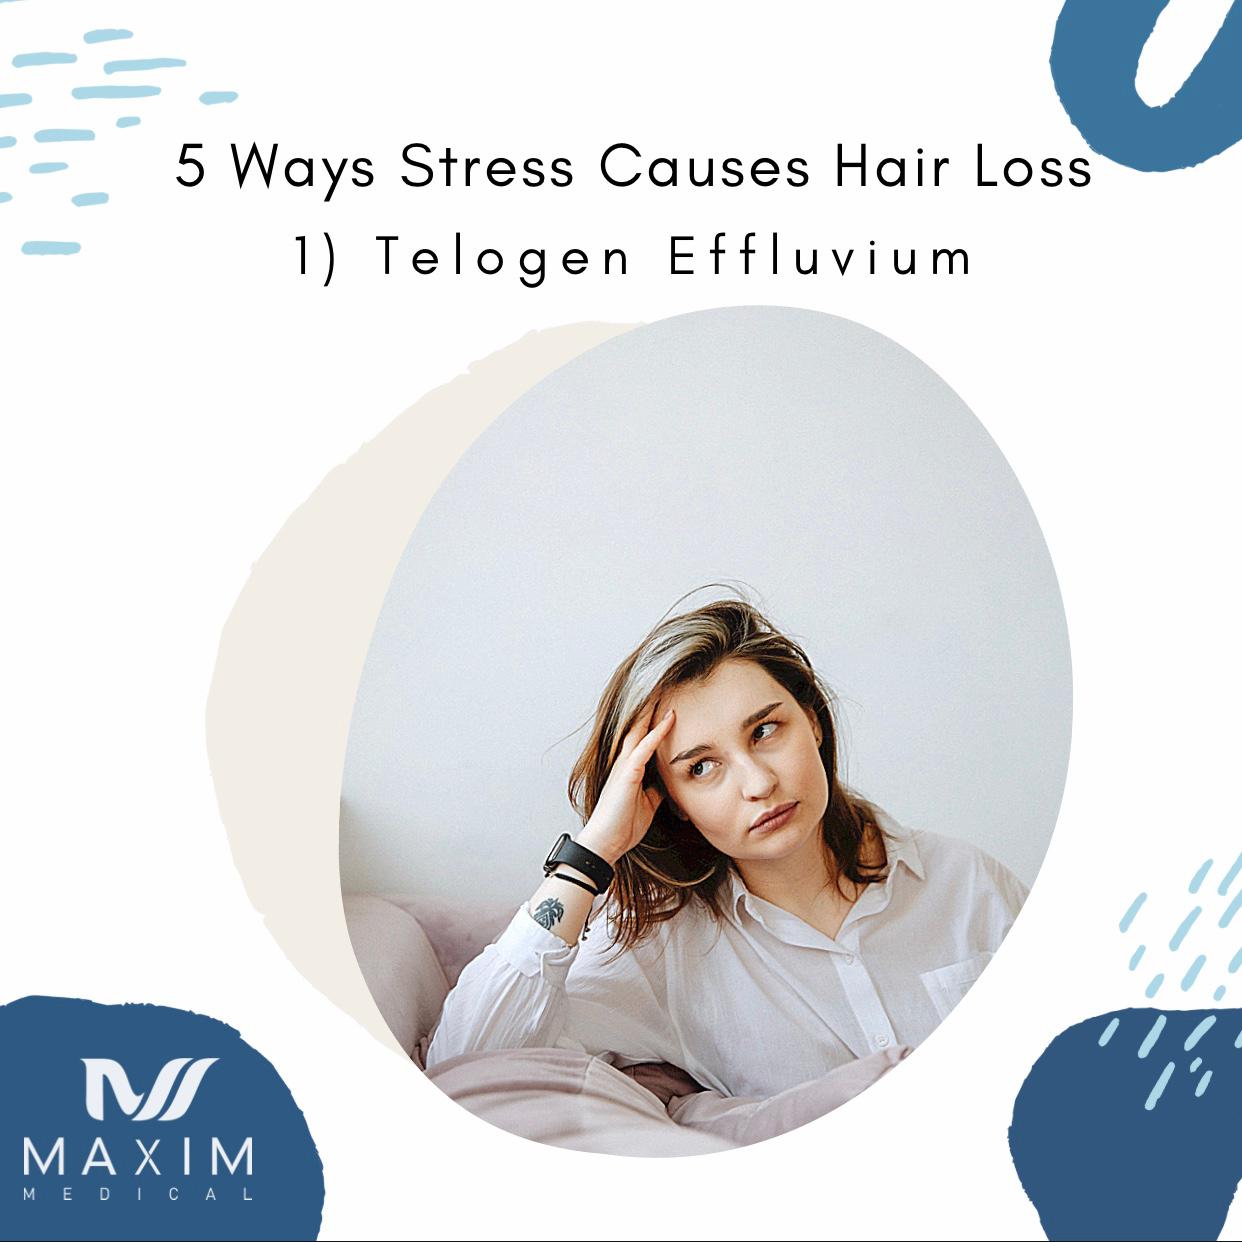 1. Telogen Effluvium
Also known as Temporary Hair Loss, Telogen Effluvium can be a result of high stress. Telogen phase or the resting phase, which is also known as the shredding phase is a stage in the natural hair cycle. Essentially what occurs in this phase normally is that 90% of hair is in the growing phase while the other 10% is in the telogen/resting phase, waiting to fall out. In the case of TE, stress sends a large number of hair into the resting phase. Therefore more hair strands are forced into the resting phase than normal. These dormant hair strands would remain dormant for 2 to 3 months from the beginning of the underlying illness, and then starts to fall off.